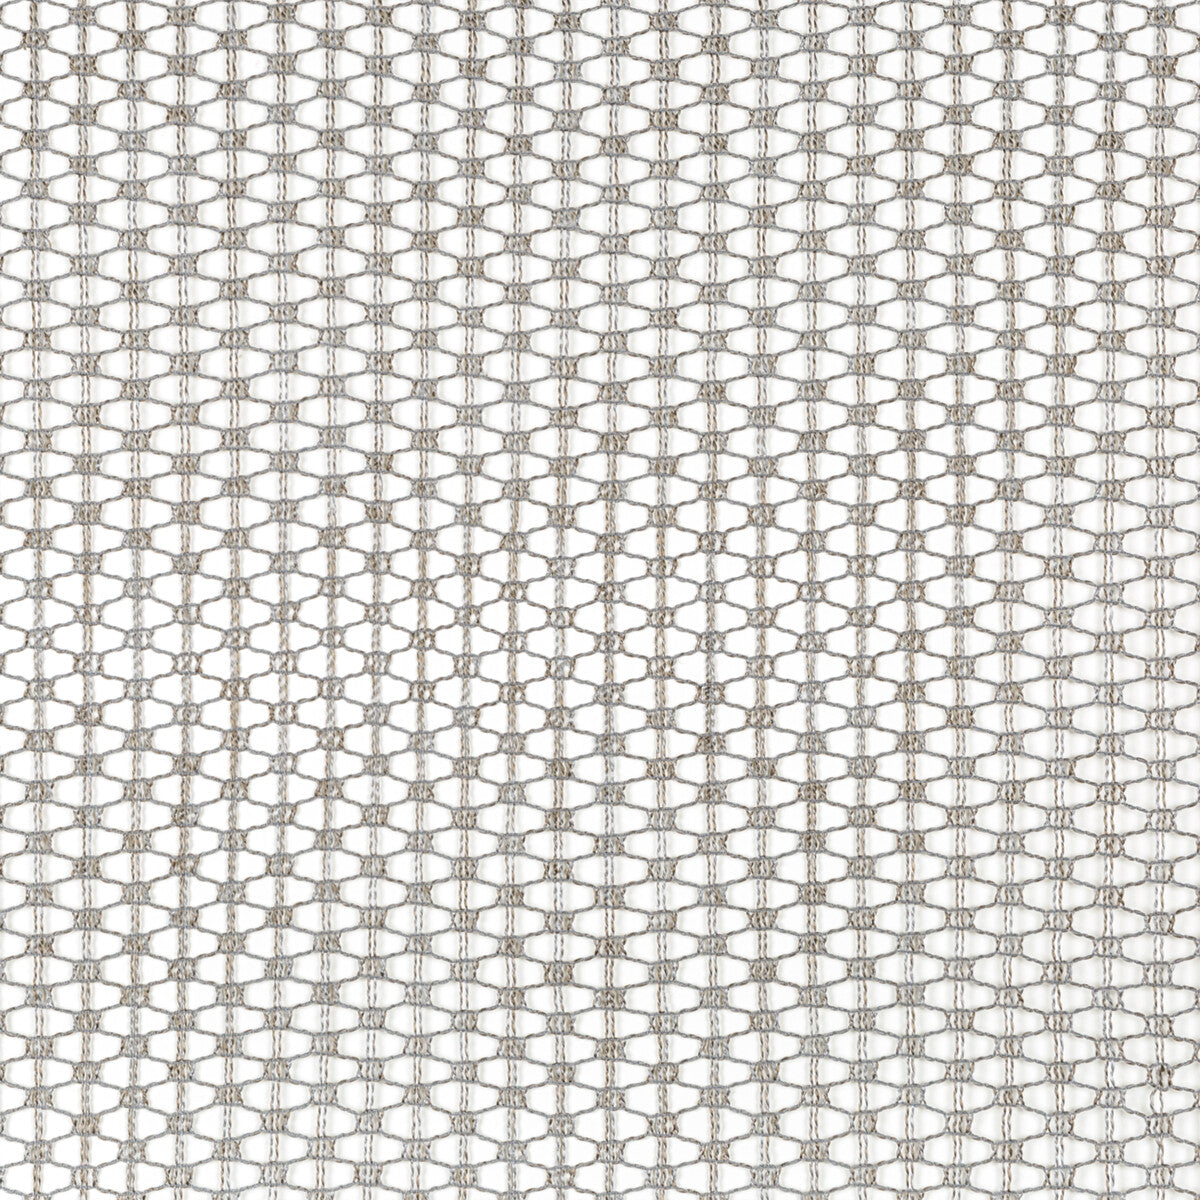 Fresh Air fabric in pewter color - pattern 4823.11.0 - by Kravet Contract